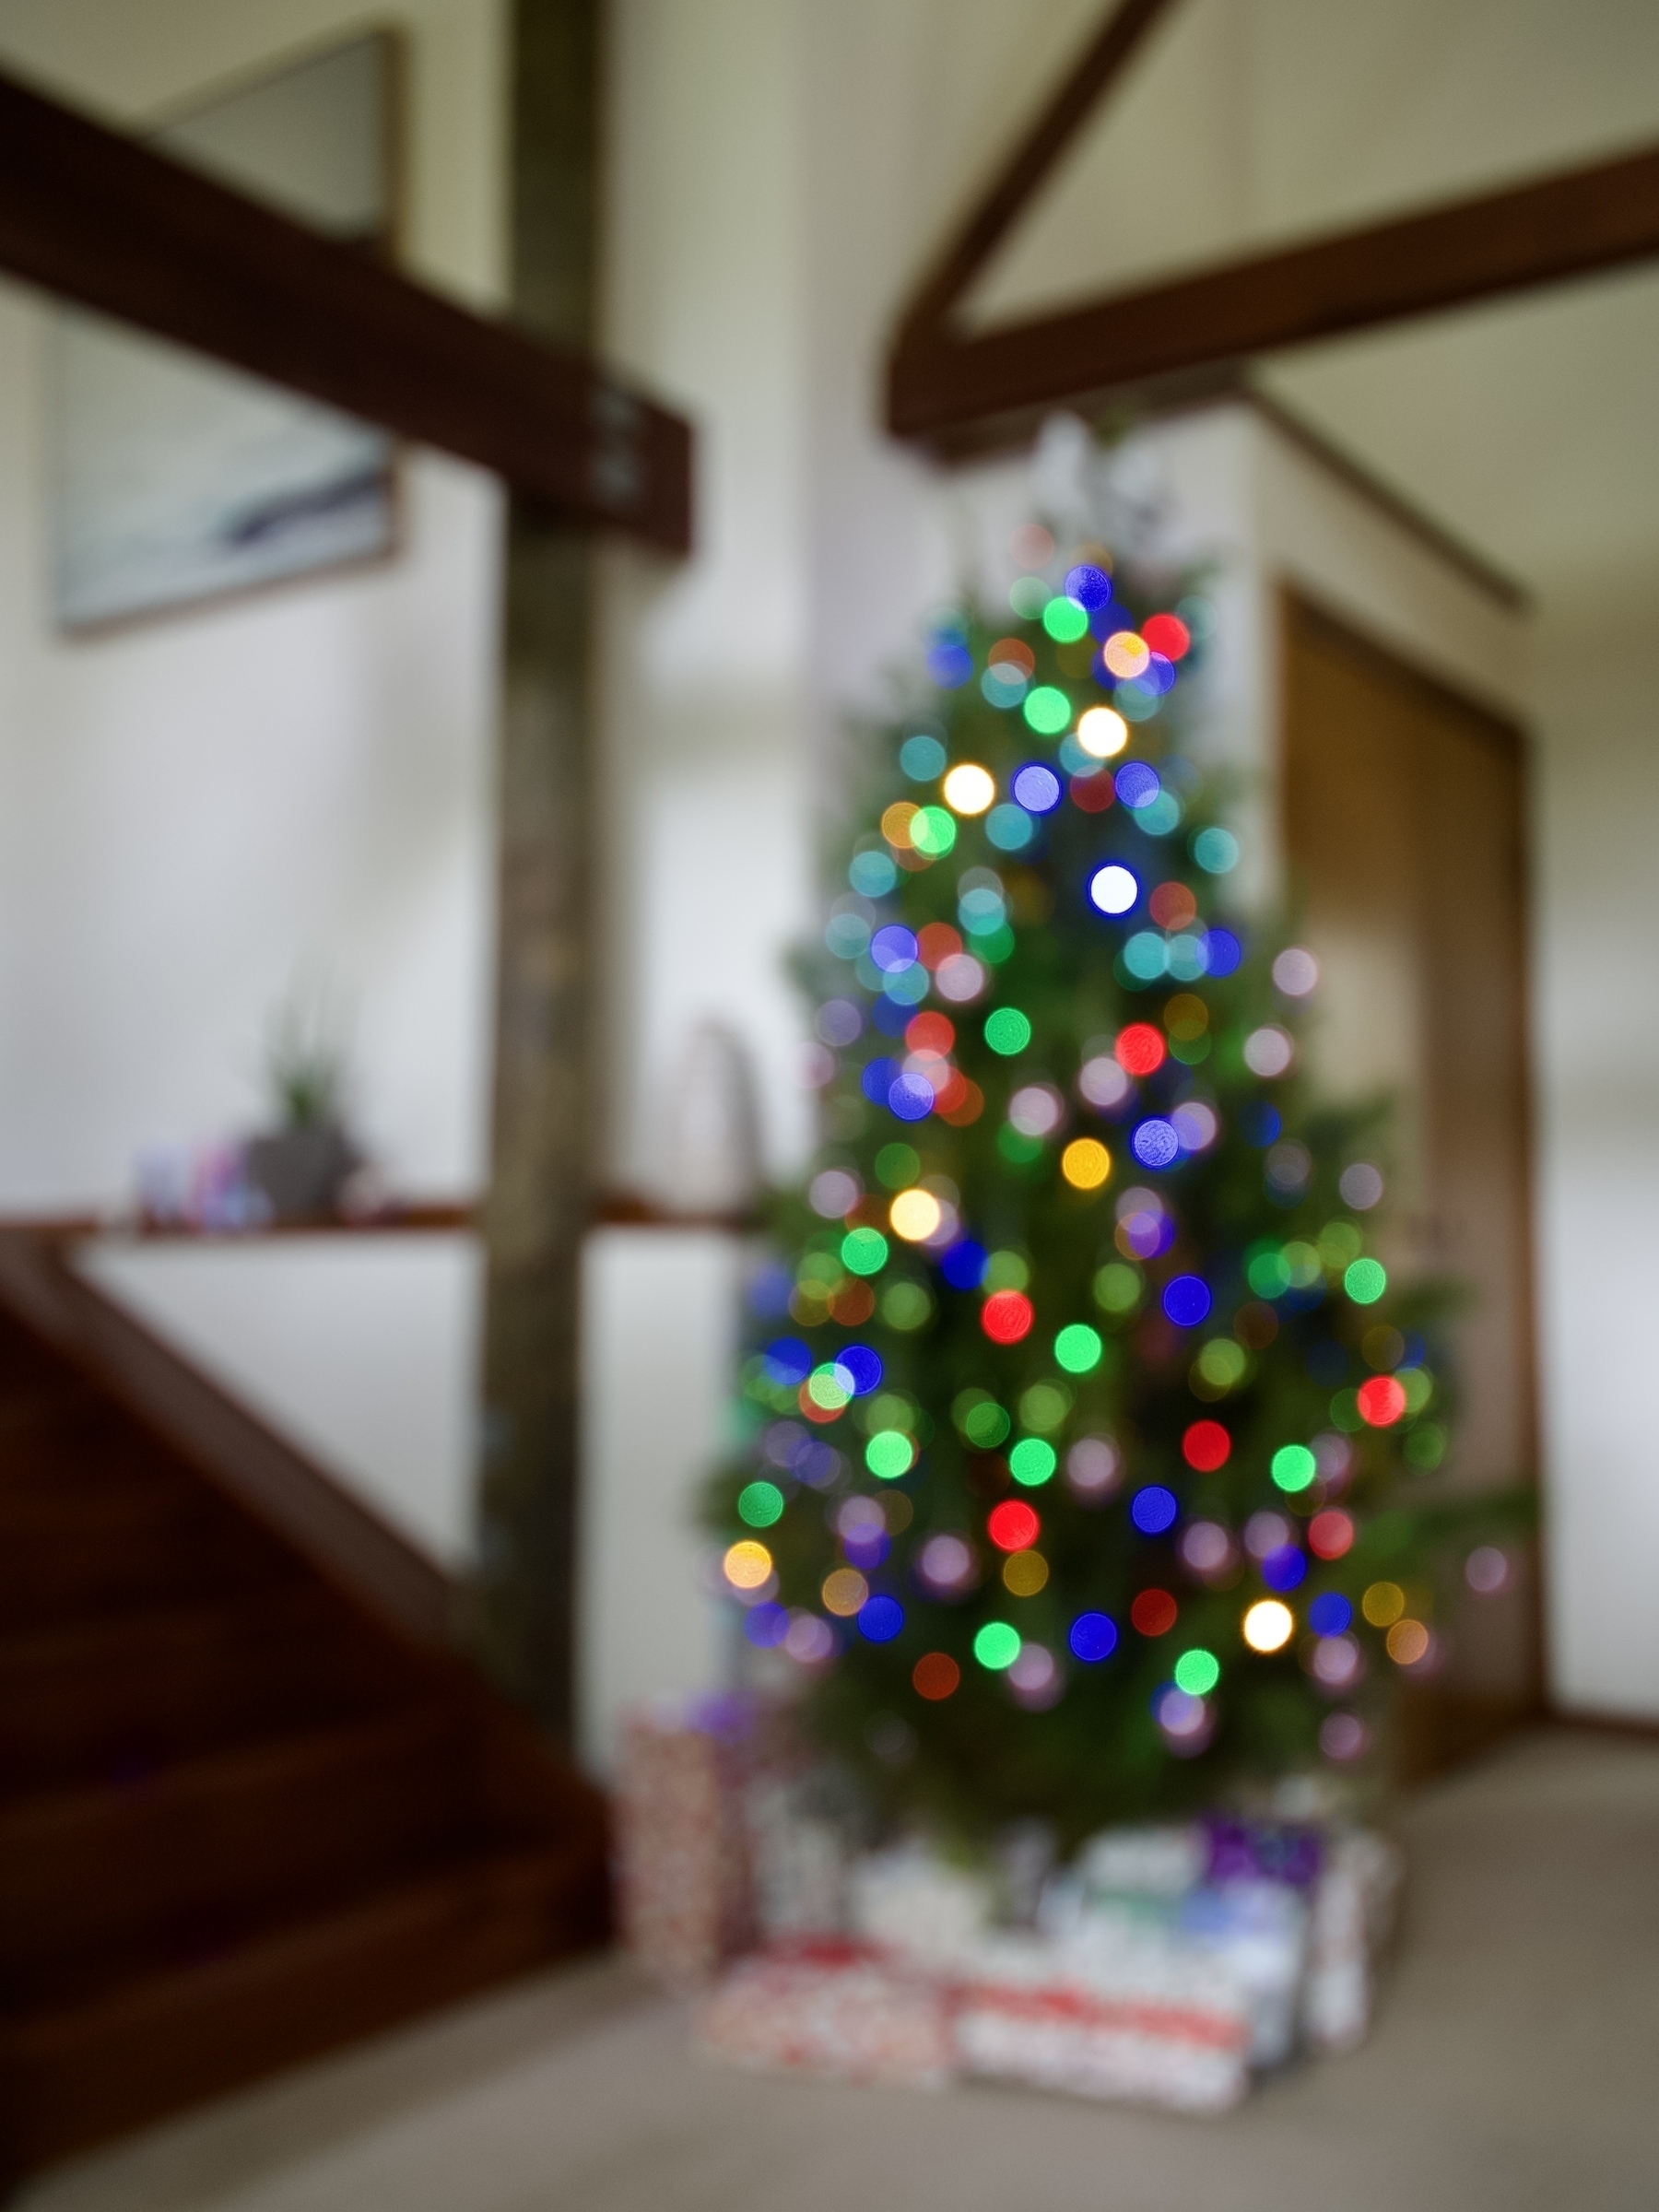 A blurred Christmas tree in a lounge room